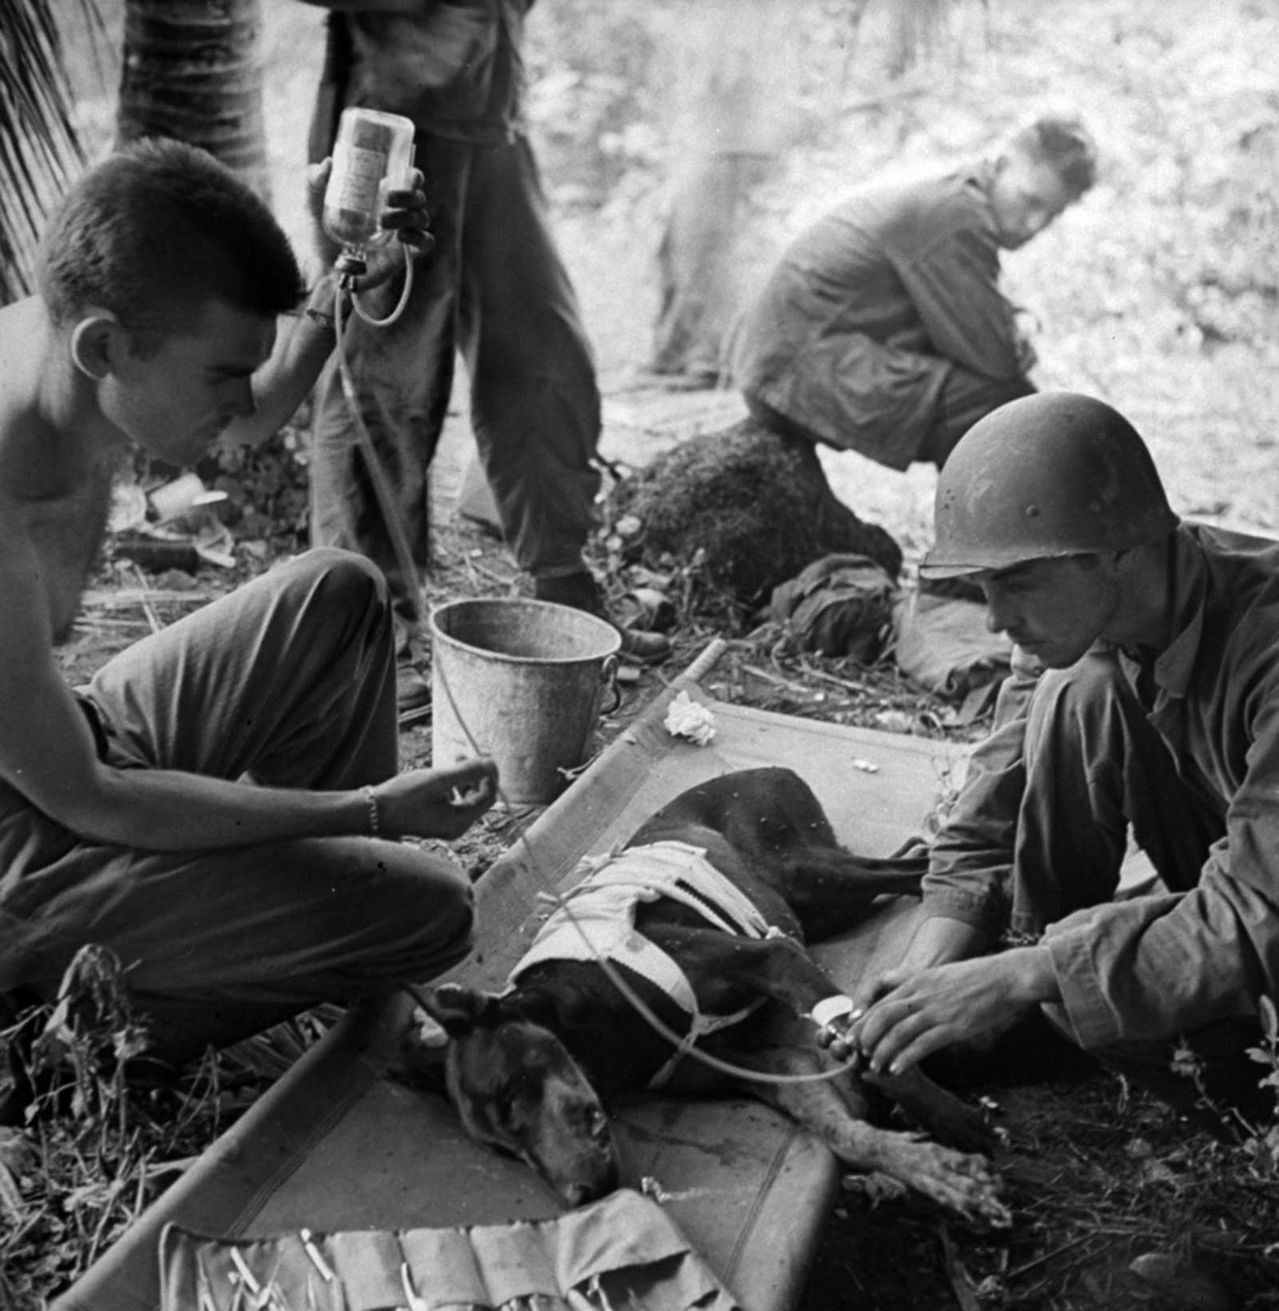 Wounded combat dog during action on the Orote Peninsula, 1944.

In the late summer of 1942, the Marine Corps decided to experiment with the use of dogs in war, which may have been a new departure for the Corps, but not a new idea in warfare. Since ancient times, dogs have served fighting men in various ways. The Romans, for instance, used heavy mastiffs with armored collars to attack the legs of their enemies, thus forcing them to lower their shields. On Guam, First Lieutenant William R. Putney commanded the 1st Dog Platoon and was the veterinarian for all war dogs on Guam. First Lieutenant William T. Taylor commanded the 2d Platoon. Both landed on the Asan-Adelup beach on Guam, while the 1st Platoon under Gunnery Sergeant L. C. Christmore landed with the 1st Provisional Brigade at Agat.
Man and dog searched out the enemy, awaited his coming, and caught him by surprise around the Marine perimeter or while on patrol. In addition, they found snipers, routed stragglers, searched out caves and pillboxes, ran messages, and protected the Marines’ foxholes as they would private homes. The dogs ate, slept, walked, and otherwise lived with their masters. The presence of dogs on the line could promise the Marines there a night’s sleep, for they alerted their handlers when the enemy came near. Overall, some 350 war dogs served in the Guam operation.
Early on in the Guam operations, some dogs were wounded or killed by machine gun and rifle fire, and incoming mortars were as devastating to the dogs as they were to the Marines. When the dogs were wounded, the Marines made a point of getting them to the rear, to the veterinarian, as quickly as possible. In the liberation of Guam, 20 dogs were wounded and 25 killed.
From the end of the campaign to the end of the war in the Pacific, Guam served as a staging area for war dogs, of which 465 served in combat operations. Of the Marine Corps war dogs, 85 percent were Doberman Pinschers, and the rest mainly German Shepherds. At the end of the Pacific War, the Marine Corps had 510 war dogs.